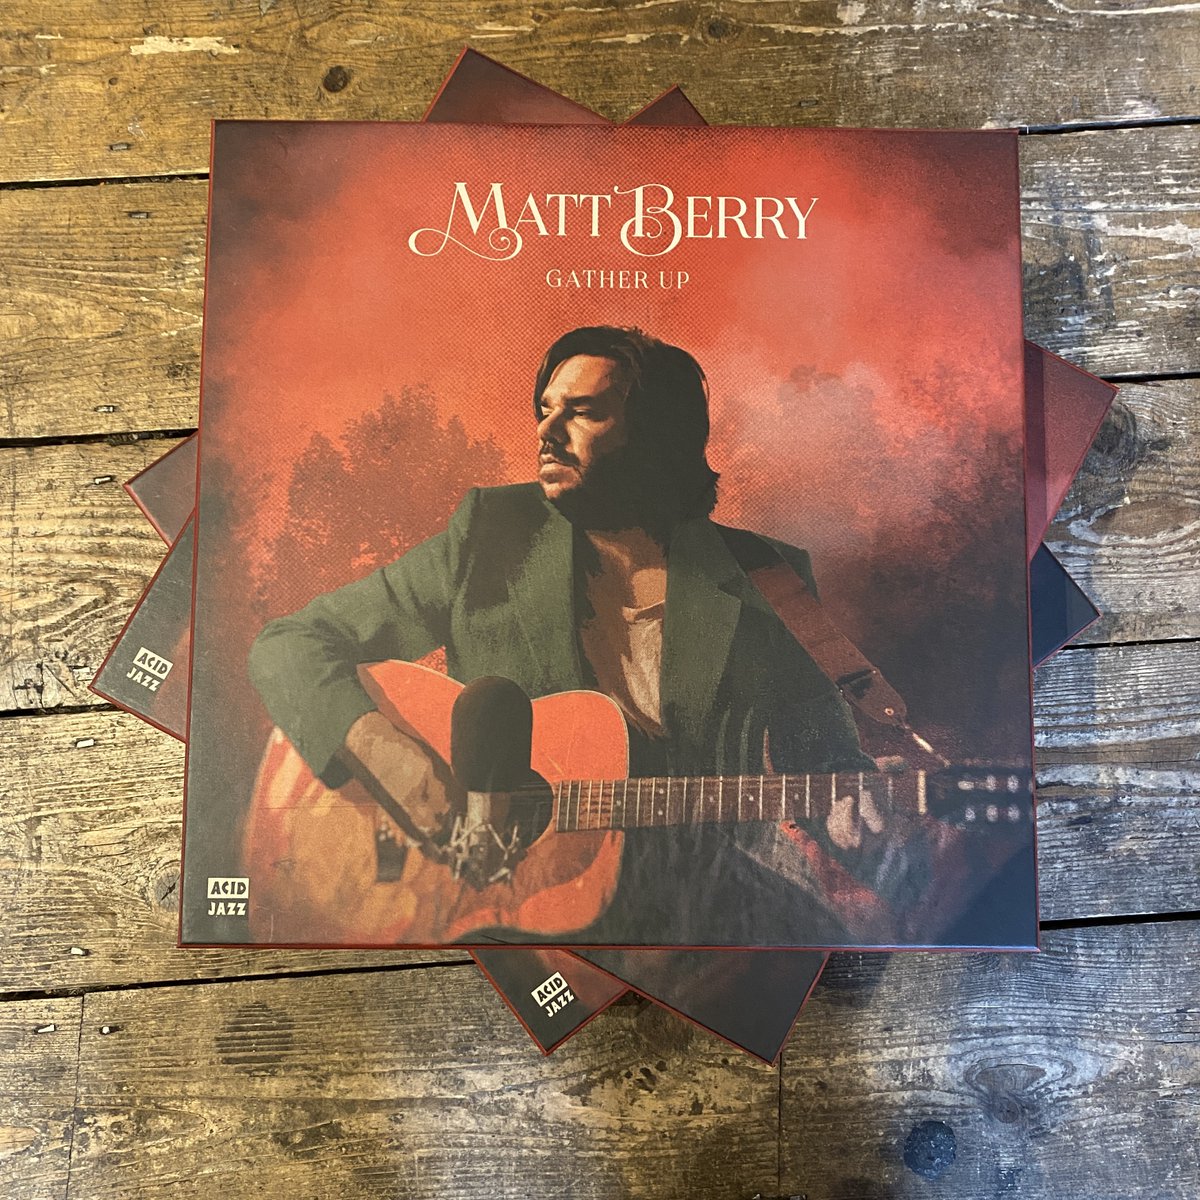 Acid Jazz have just got hold of 20 more copies of Matt Berry's Gather Up 5LP Boxset! Including these, they are now down to the last 35 copies. If you haven't got yours yet you can buy one here >> bit.ly/GatherUpLPBoxs… Be quick, these won't hang around for long!